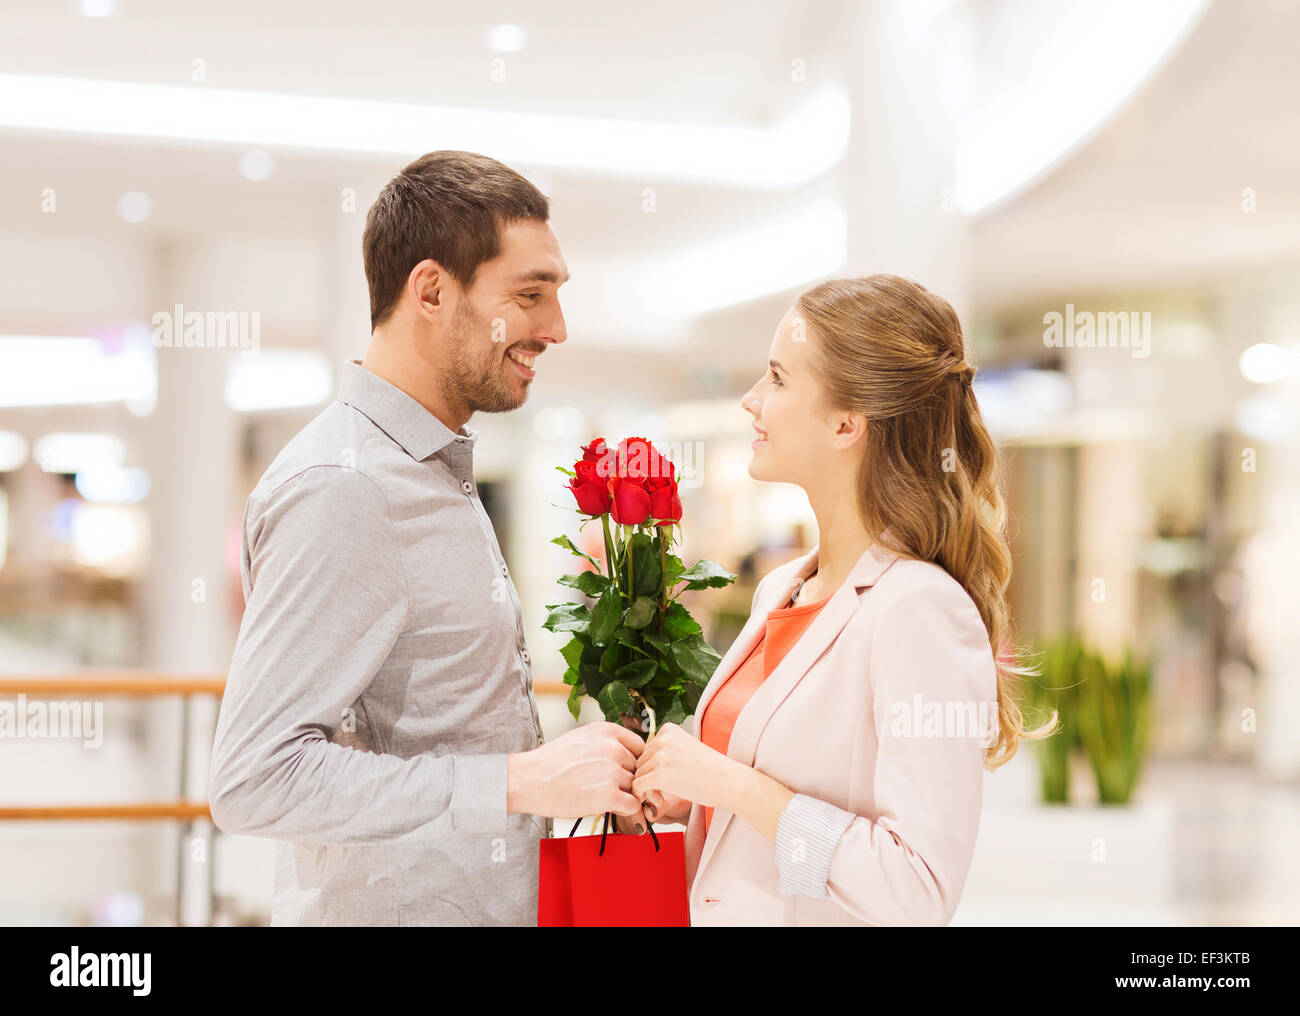 Man Giving Gift Card Beautiful Smiling Woman Home Stock Photo by  ©AndrewLozovyi 326222028